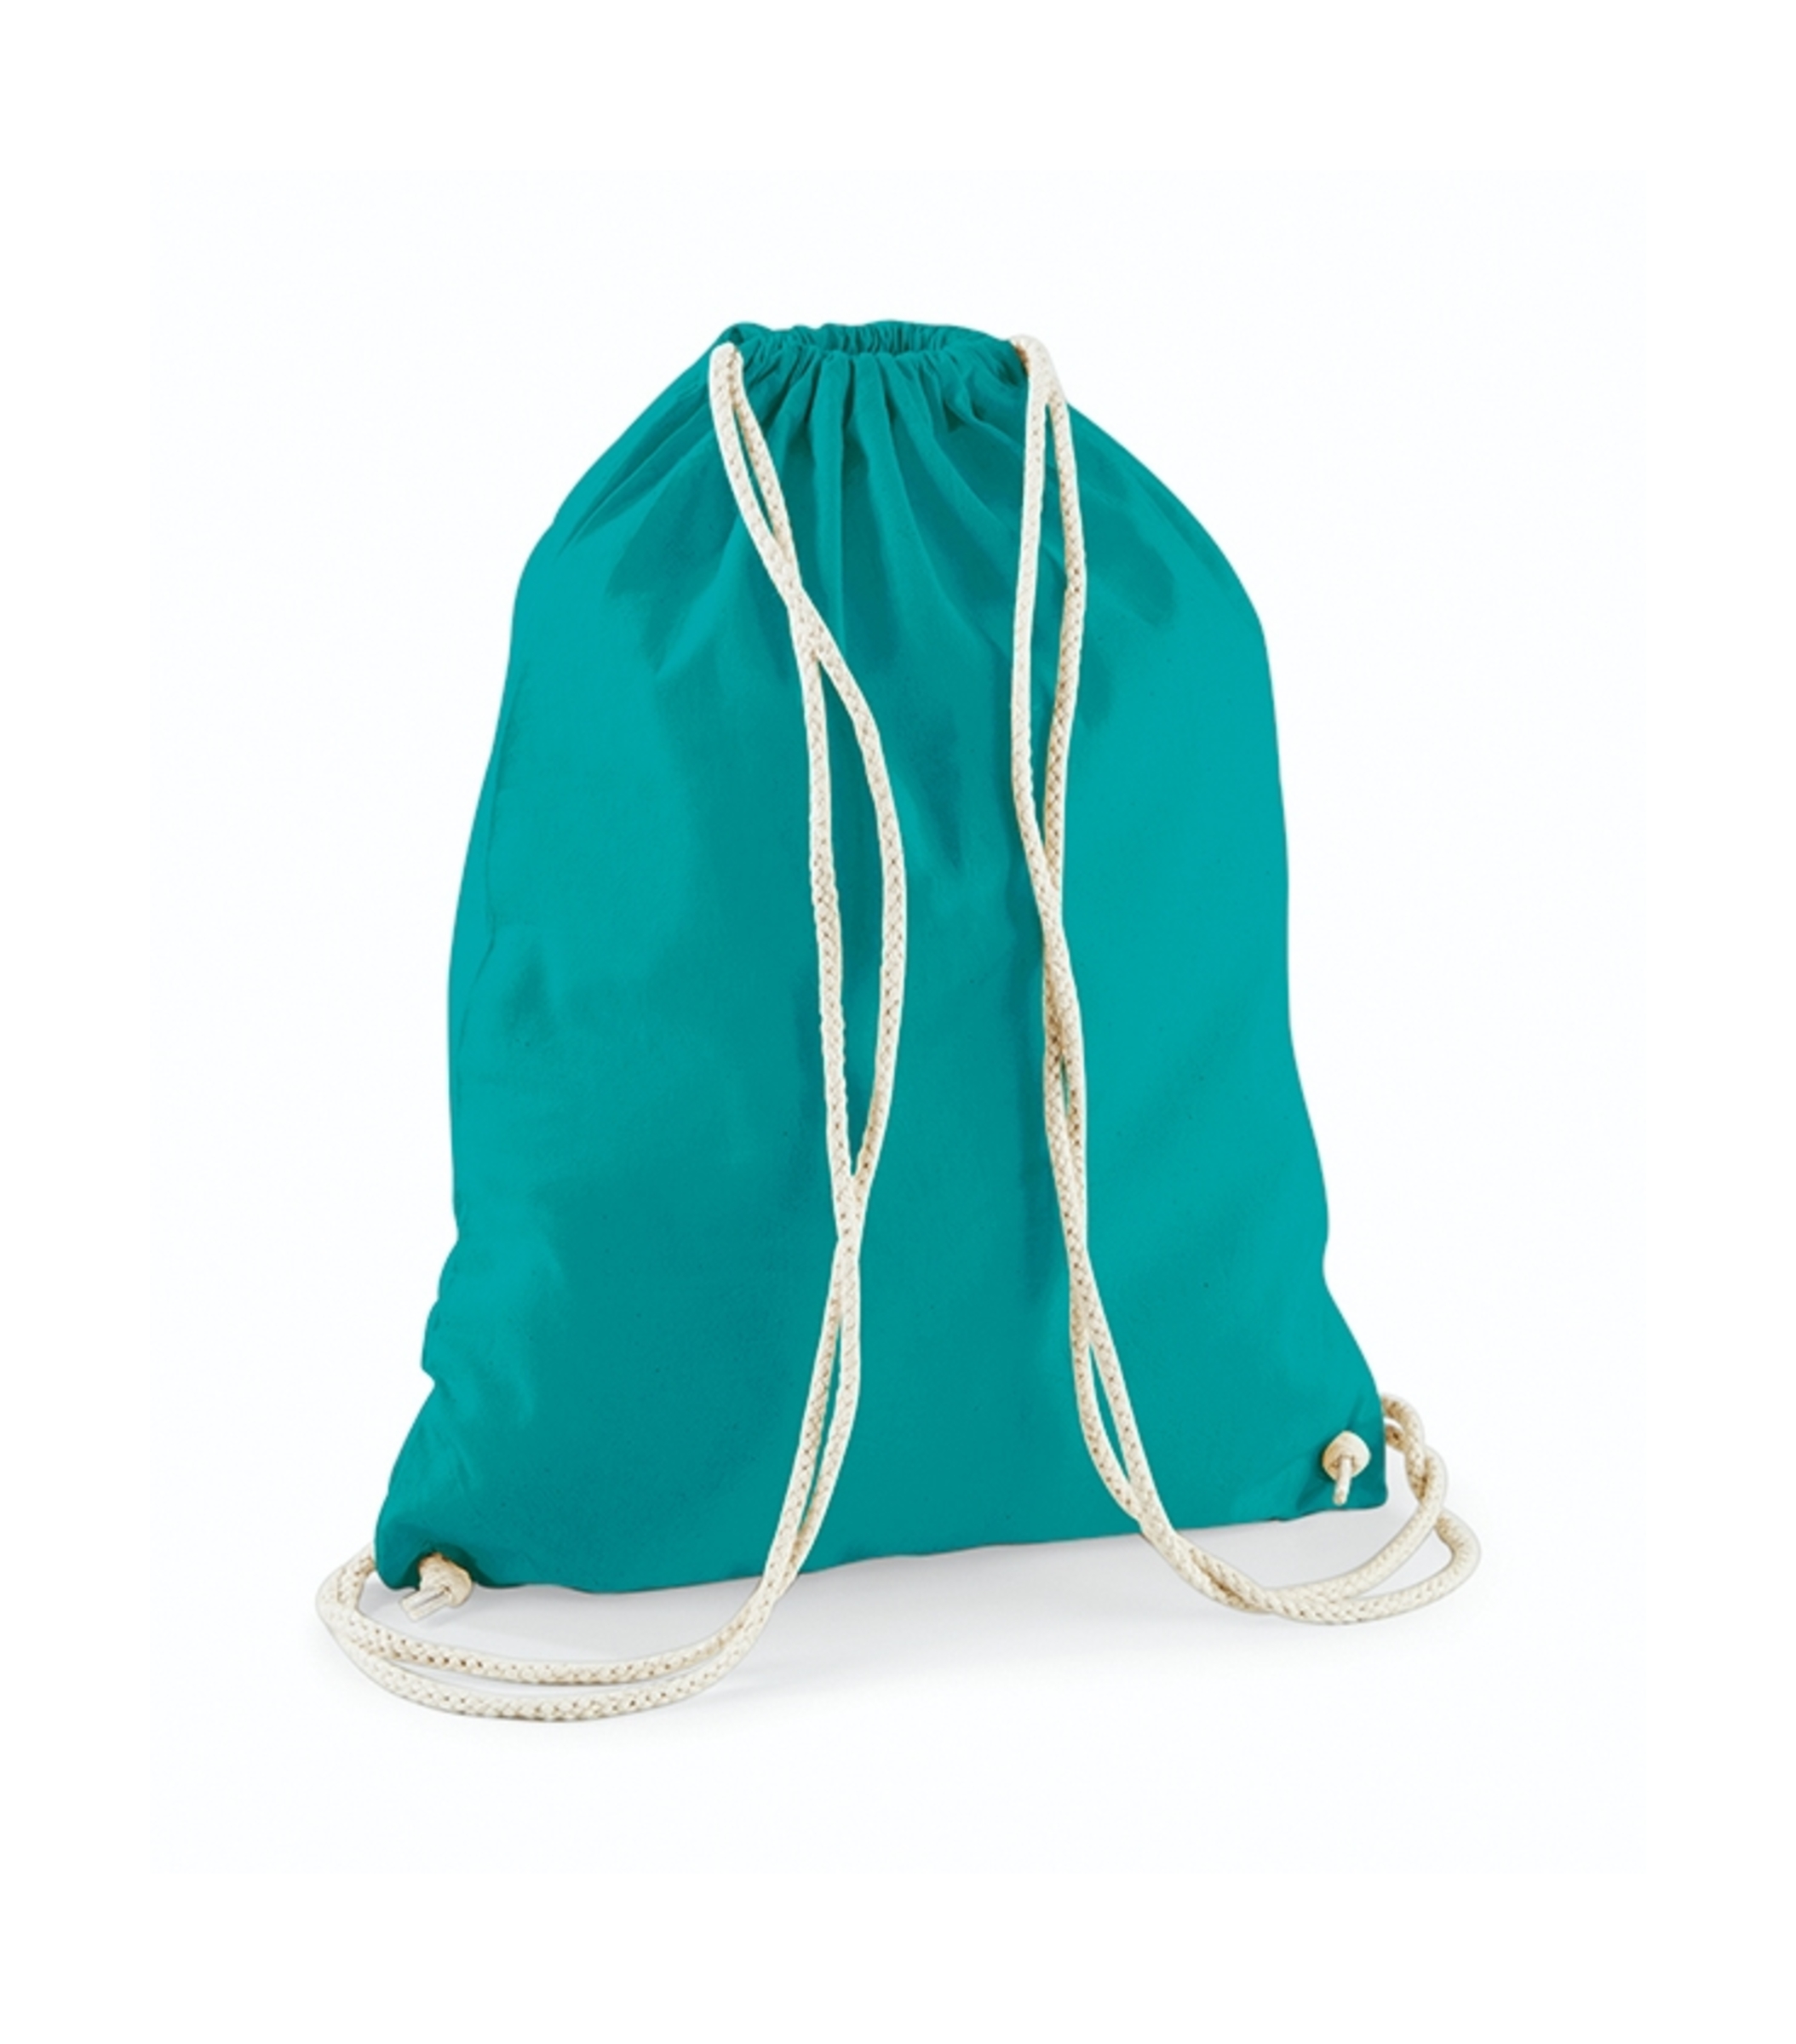 Westford Mill Cotton Gymsack - Emerald - One Size